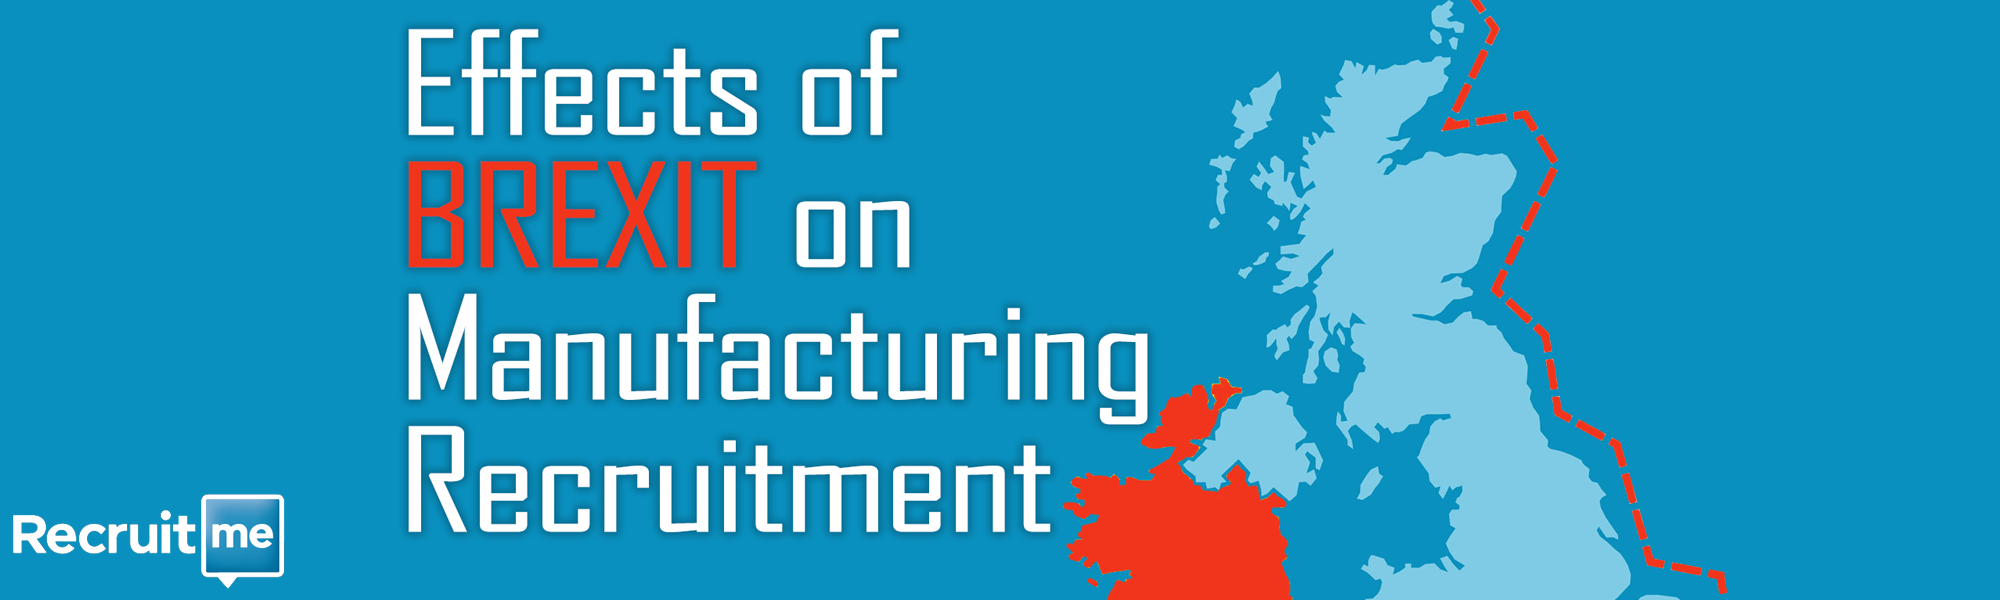 Effects of Brexit on Manufacturing Recruitment